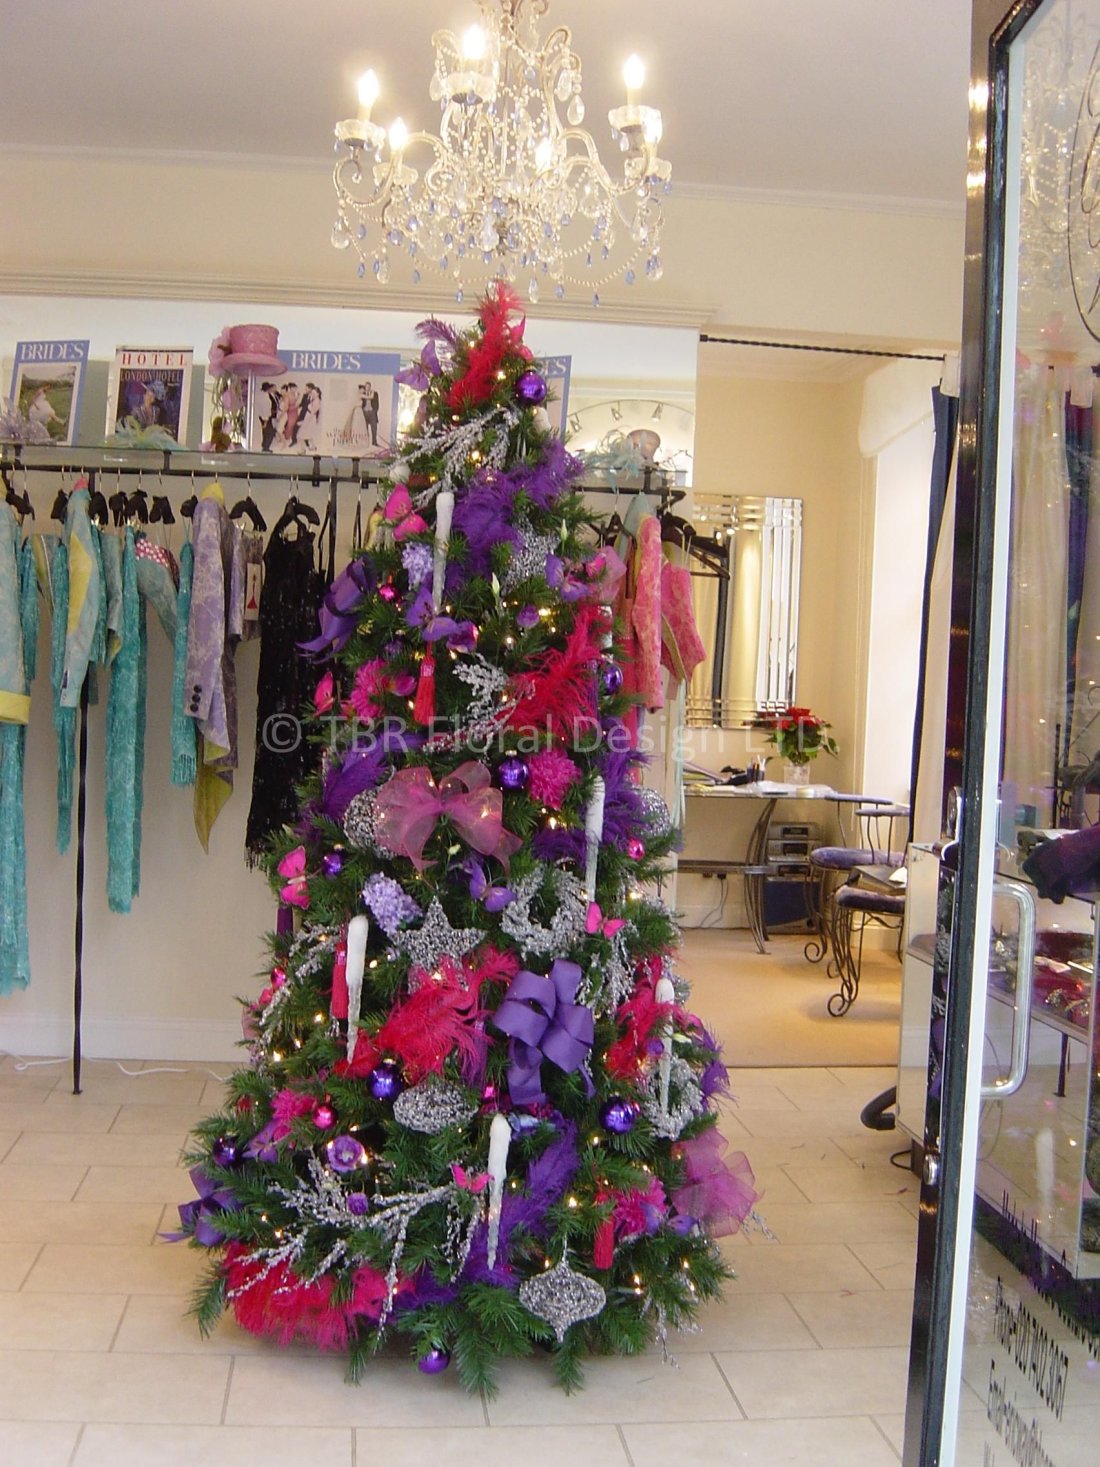 fashion-pinks-and-purple-shop-front-xmas-tree